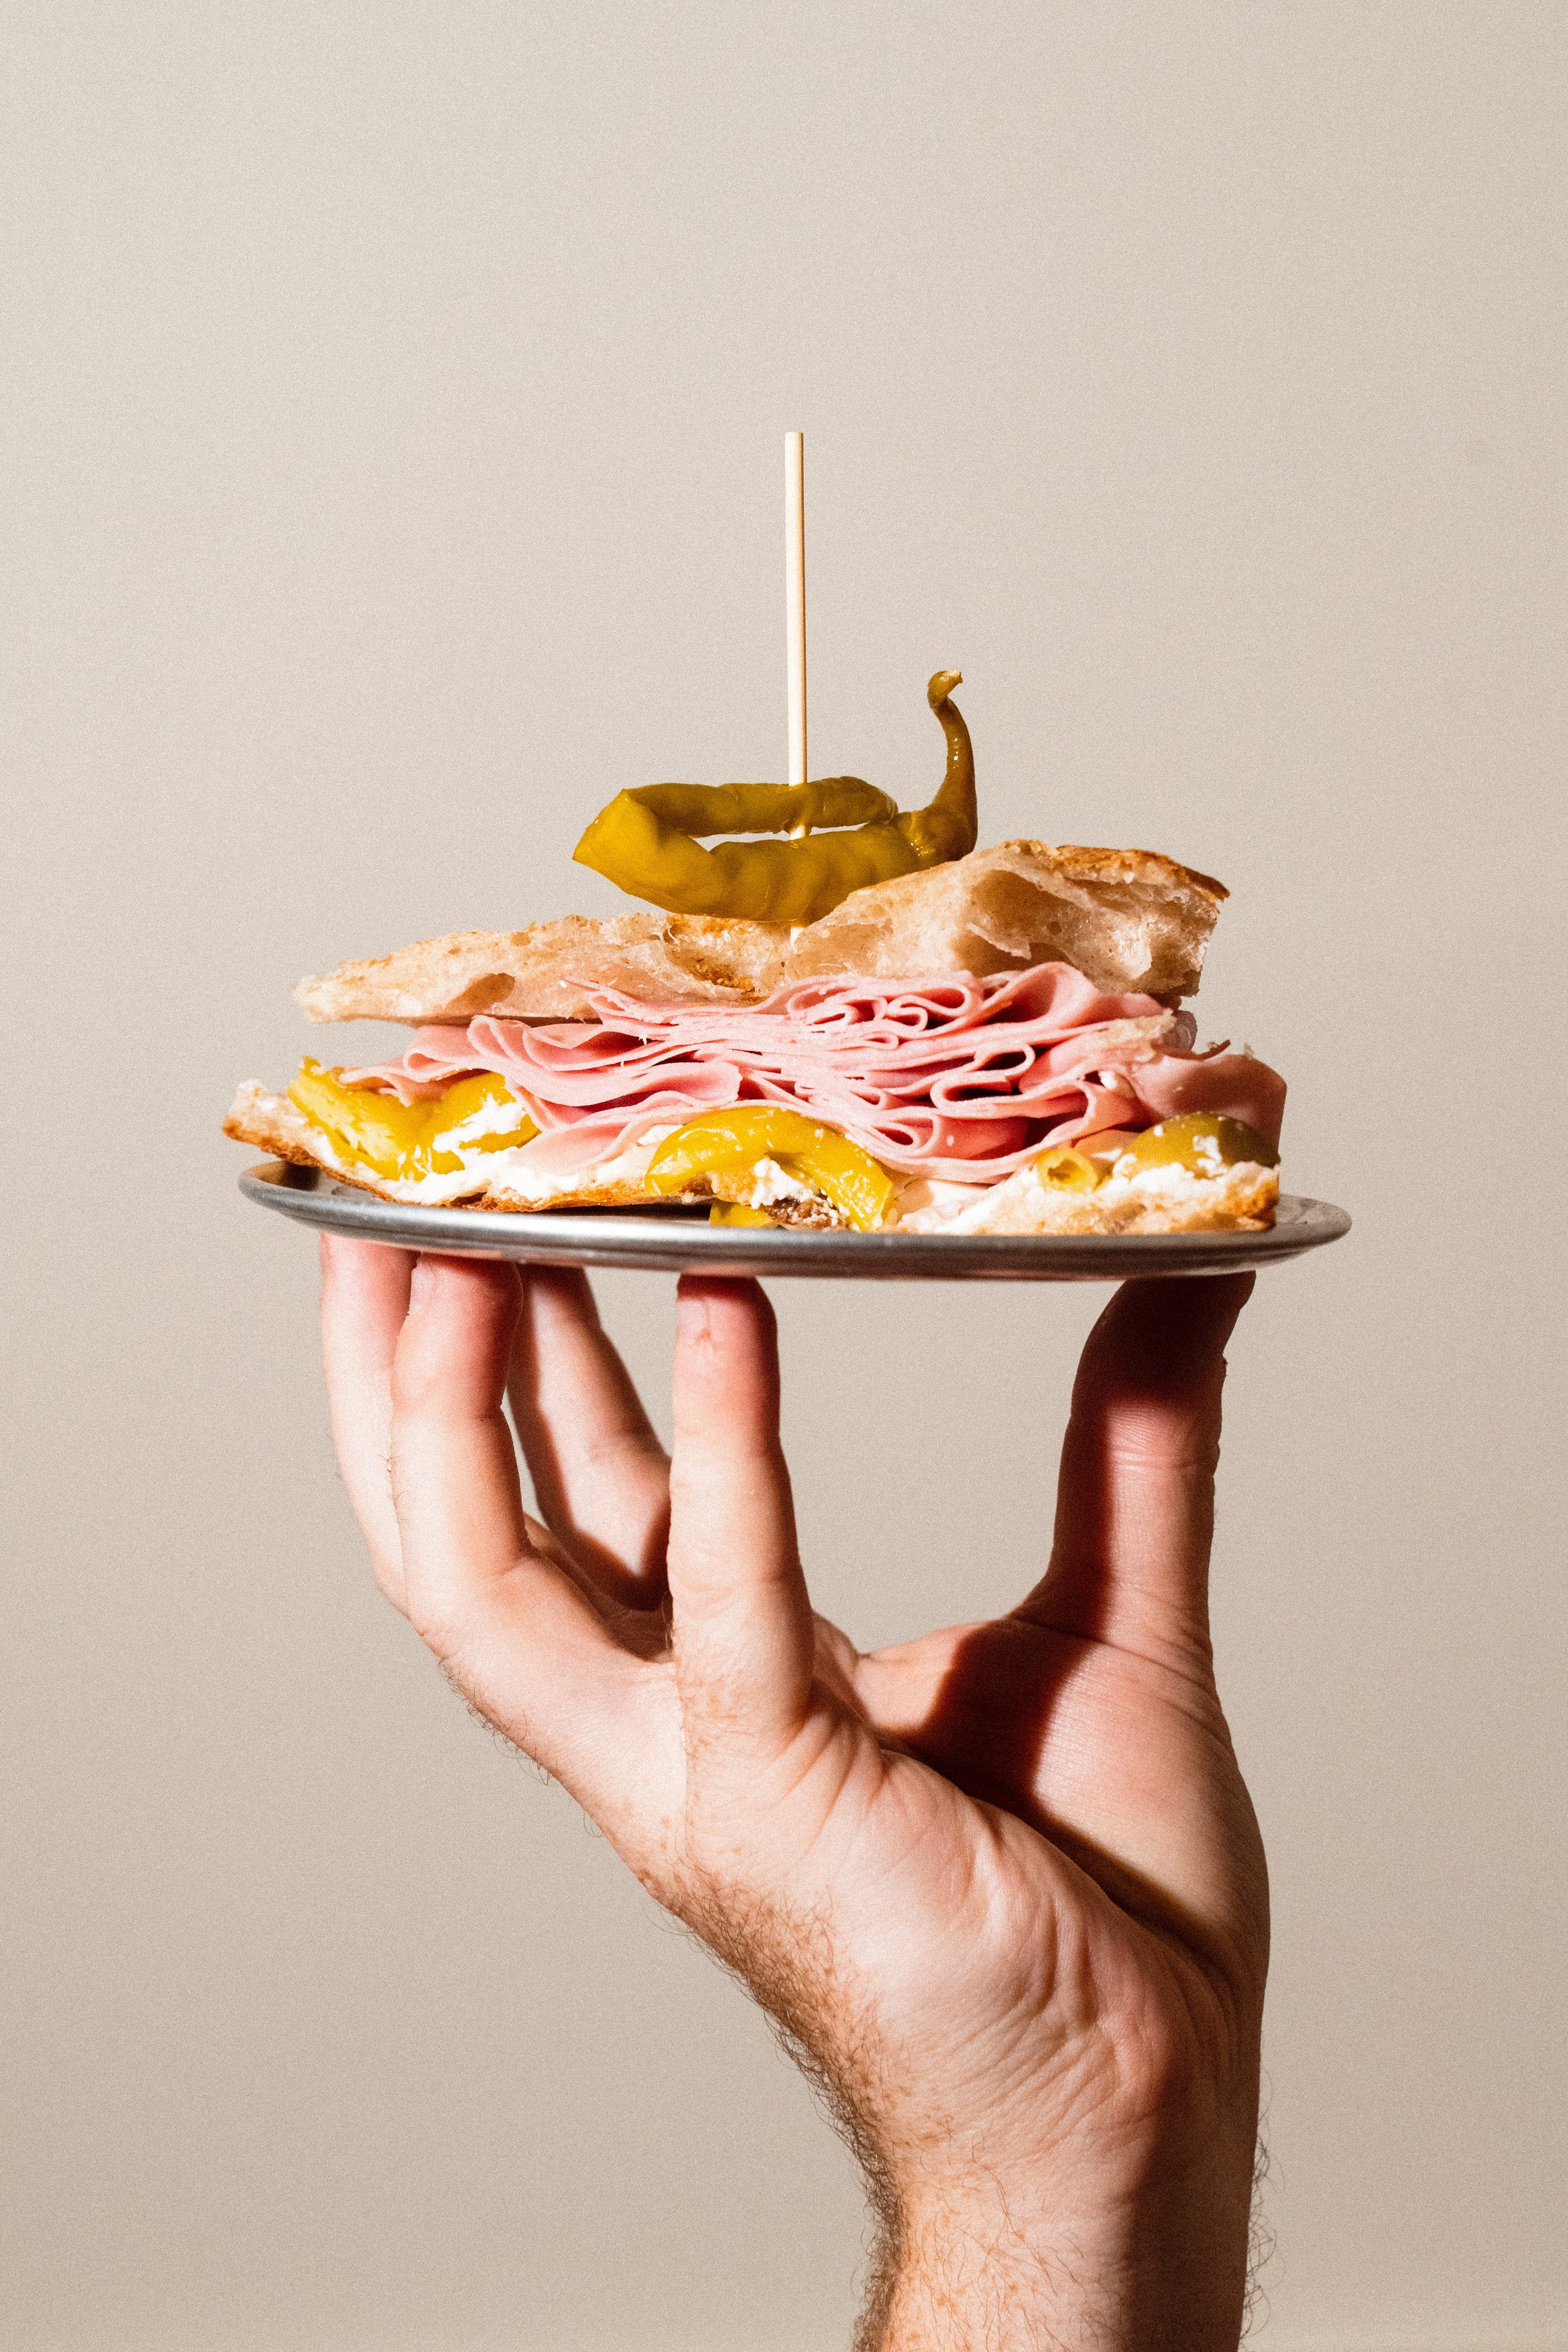 A sandwich at Bar Leone, which has been at the forefront of the Hong Kong bar scene’s shift towards high-quality food in line with consumers’ increasing demand for a holistic bar experience. Photo: Bar Leone